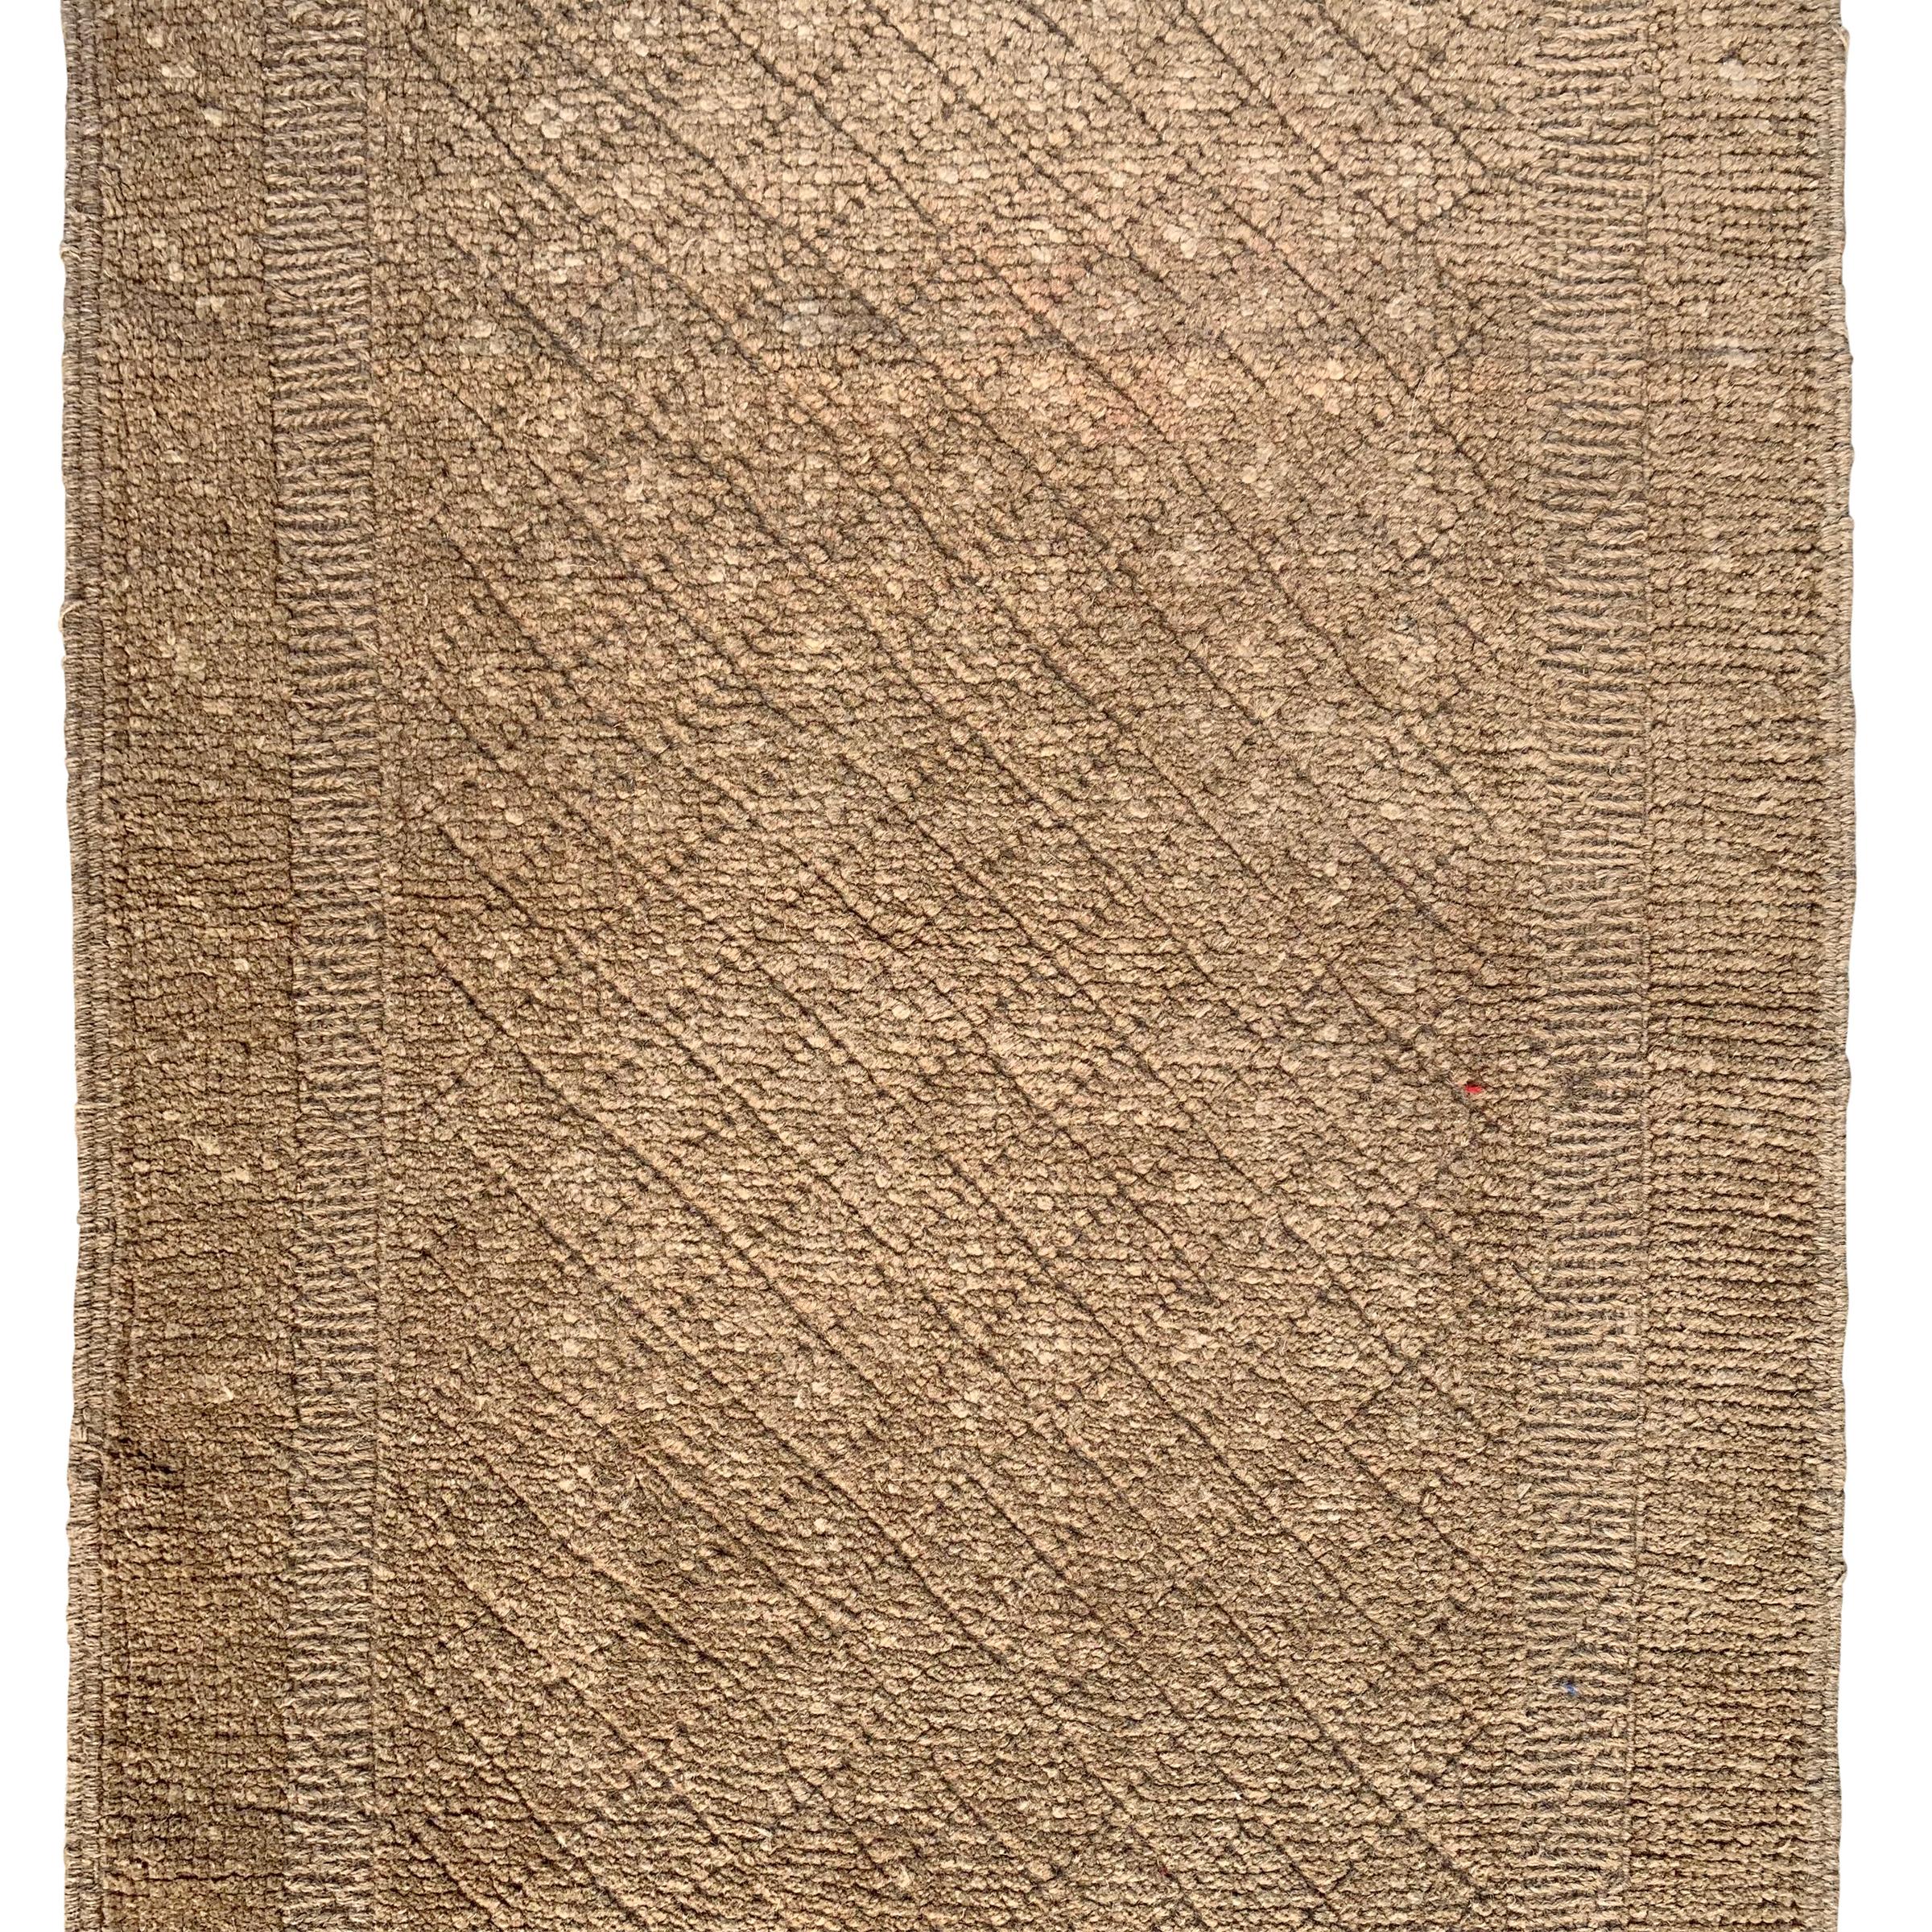 A wonderful 21st century Persian Gabbeh runner with a beautiful all-over tone on tone woven diamond pattern surrounded by a simple border.